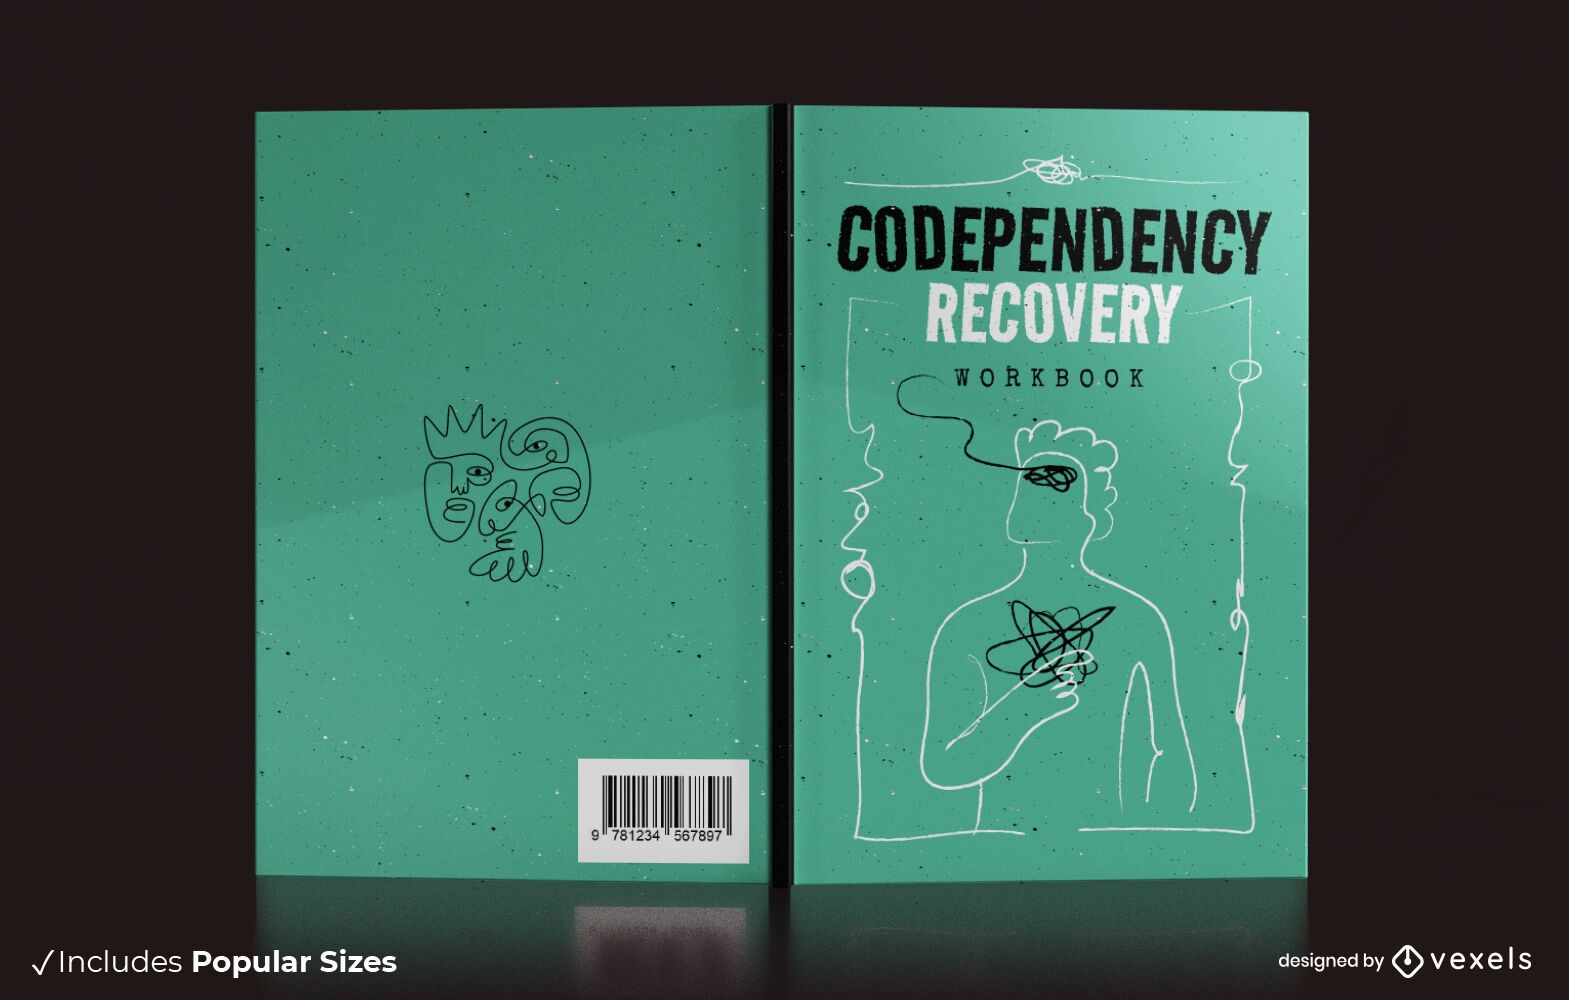 Codependency recovery book cover design KDP